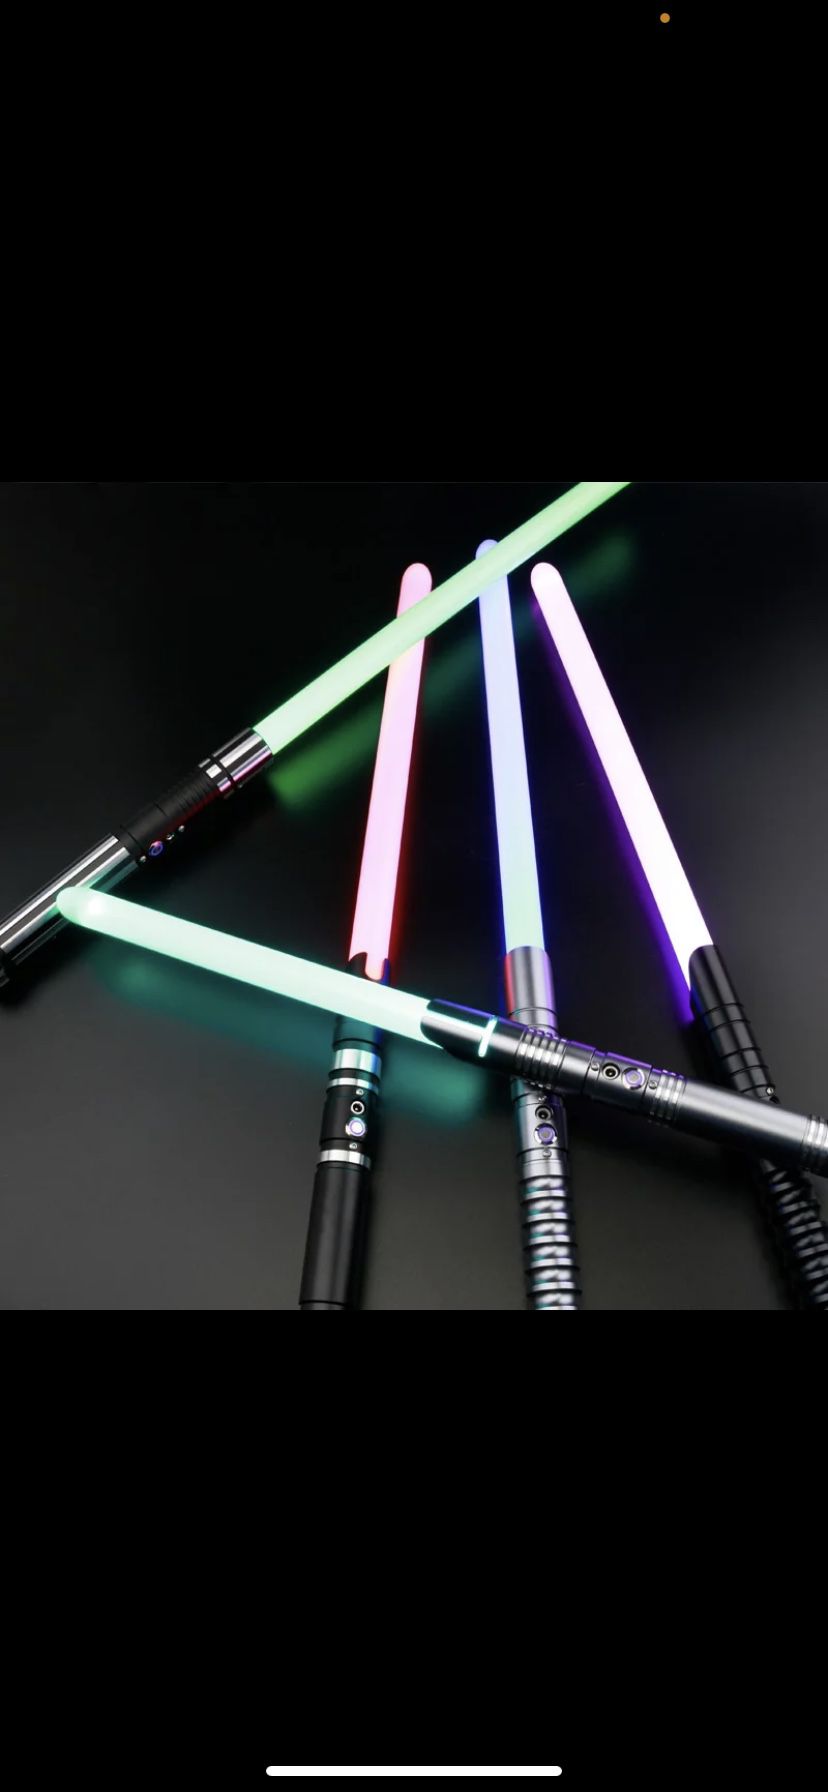 SaberFeast Lightsaber Smooth Swing Heavy Dueling 